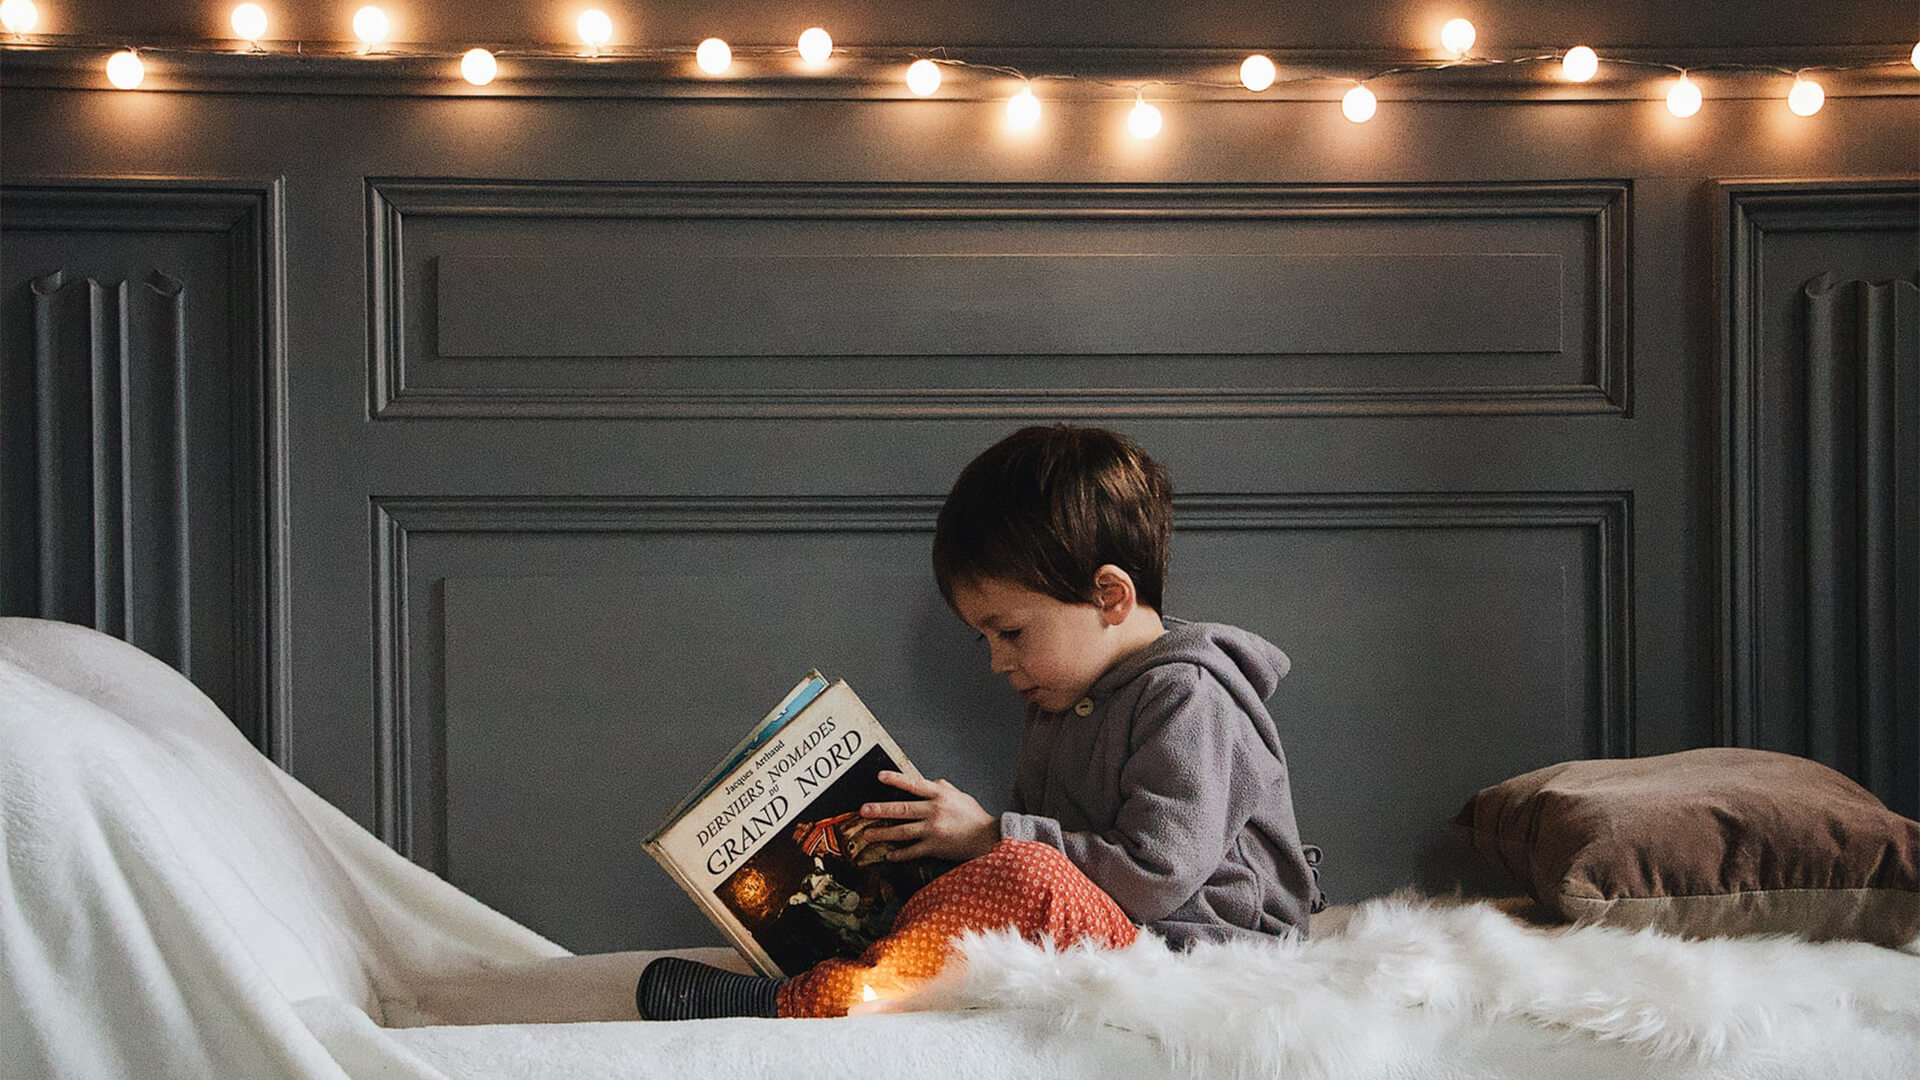 Kid reading alone in his room, with fairy lights in the wall behind him